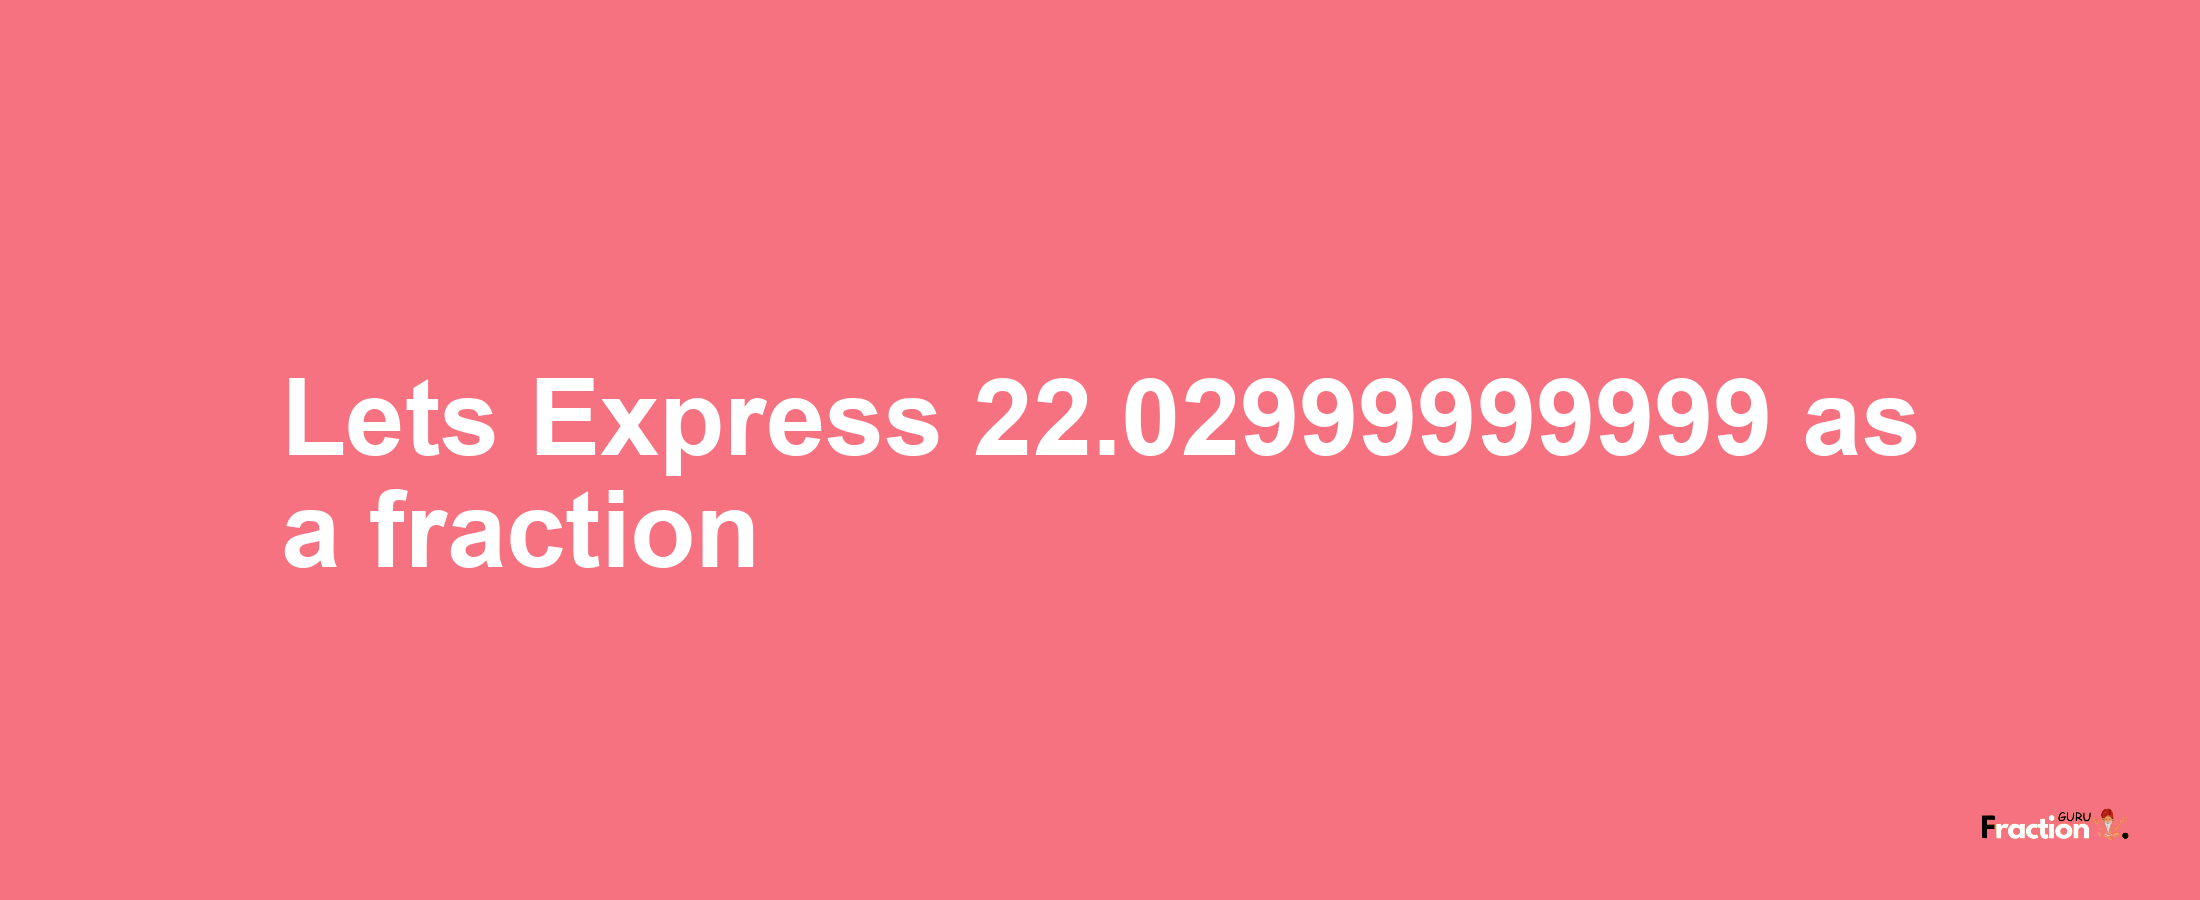 Lets Express 22.02999999999 as afraction